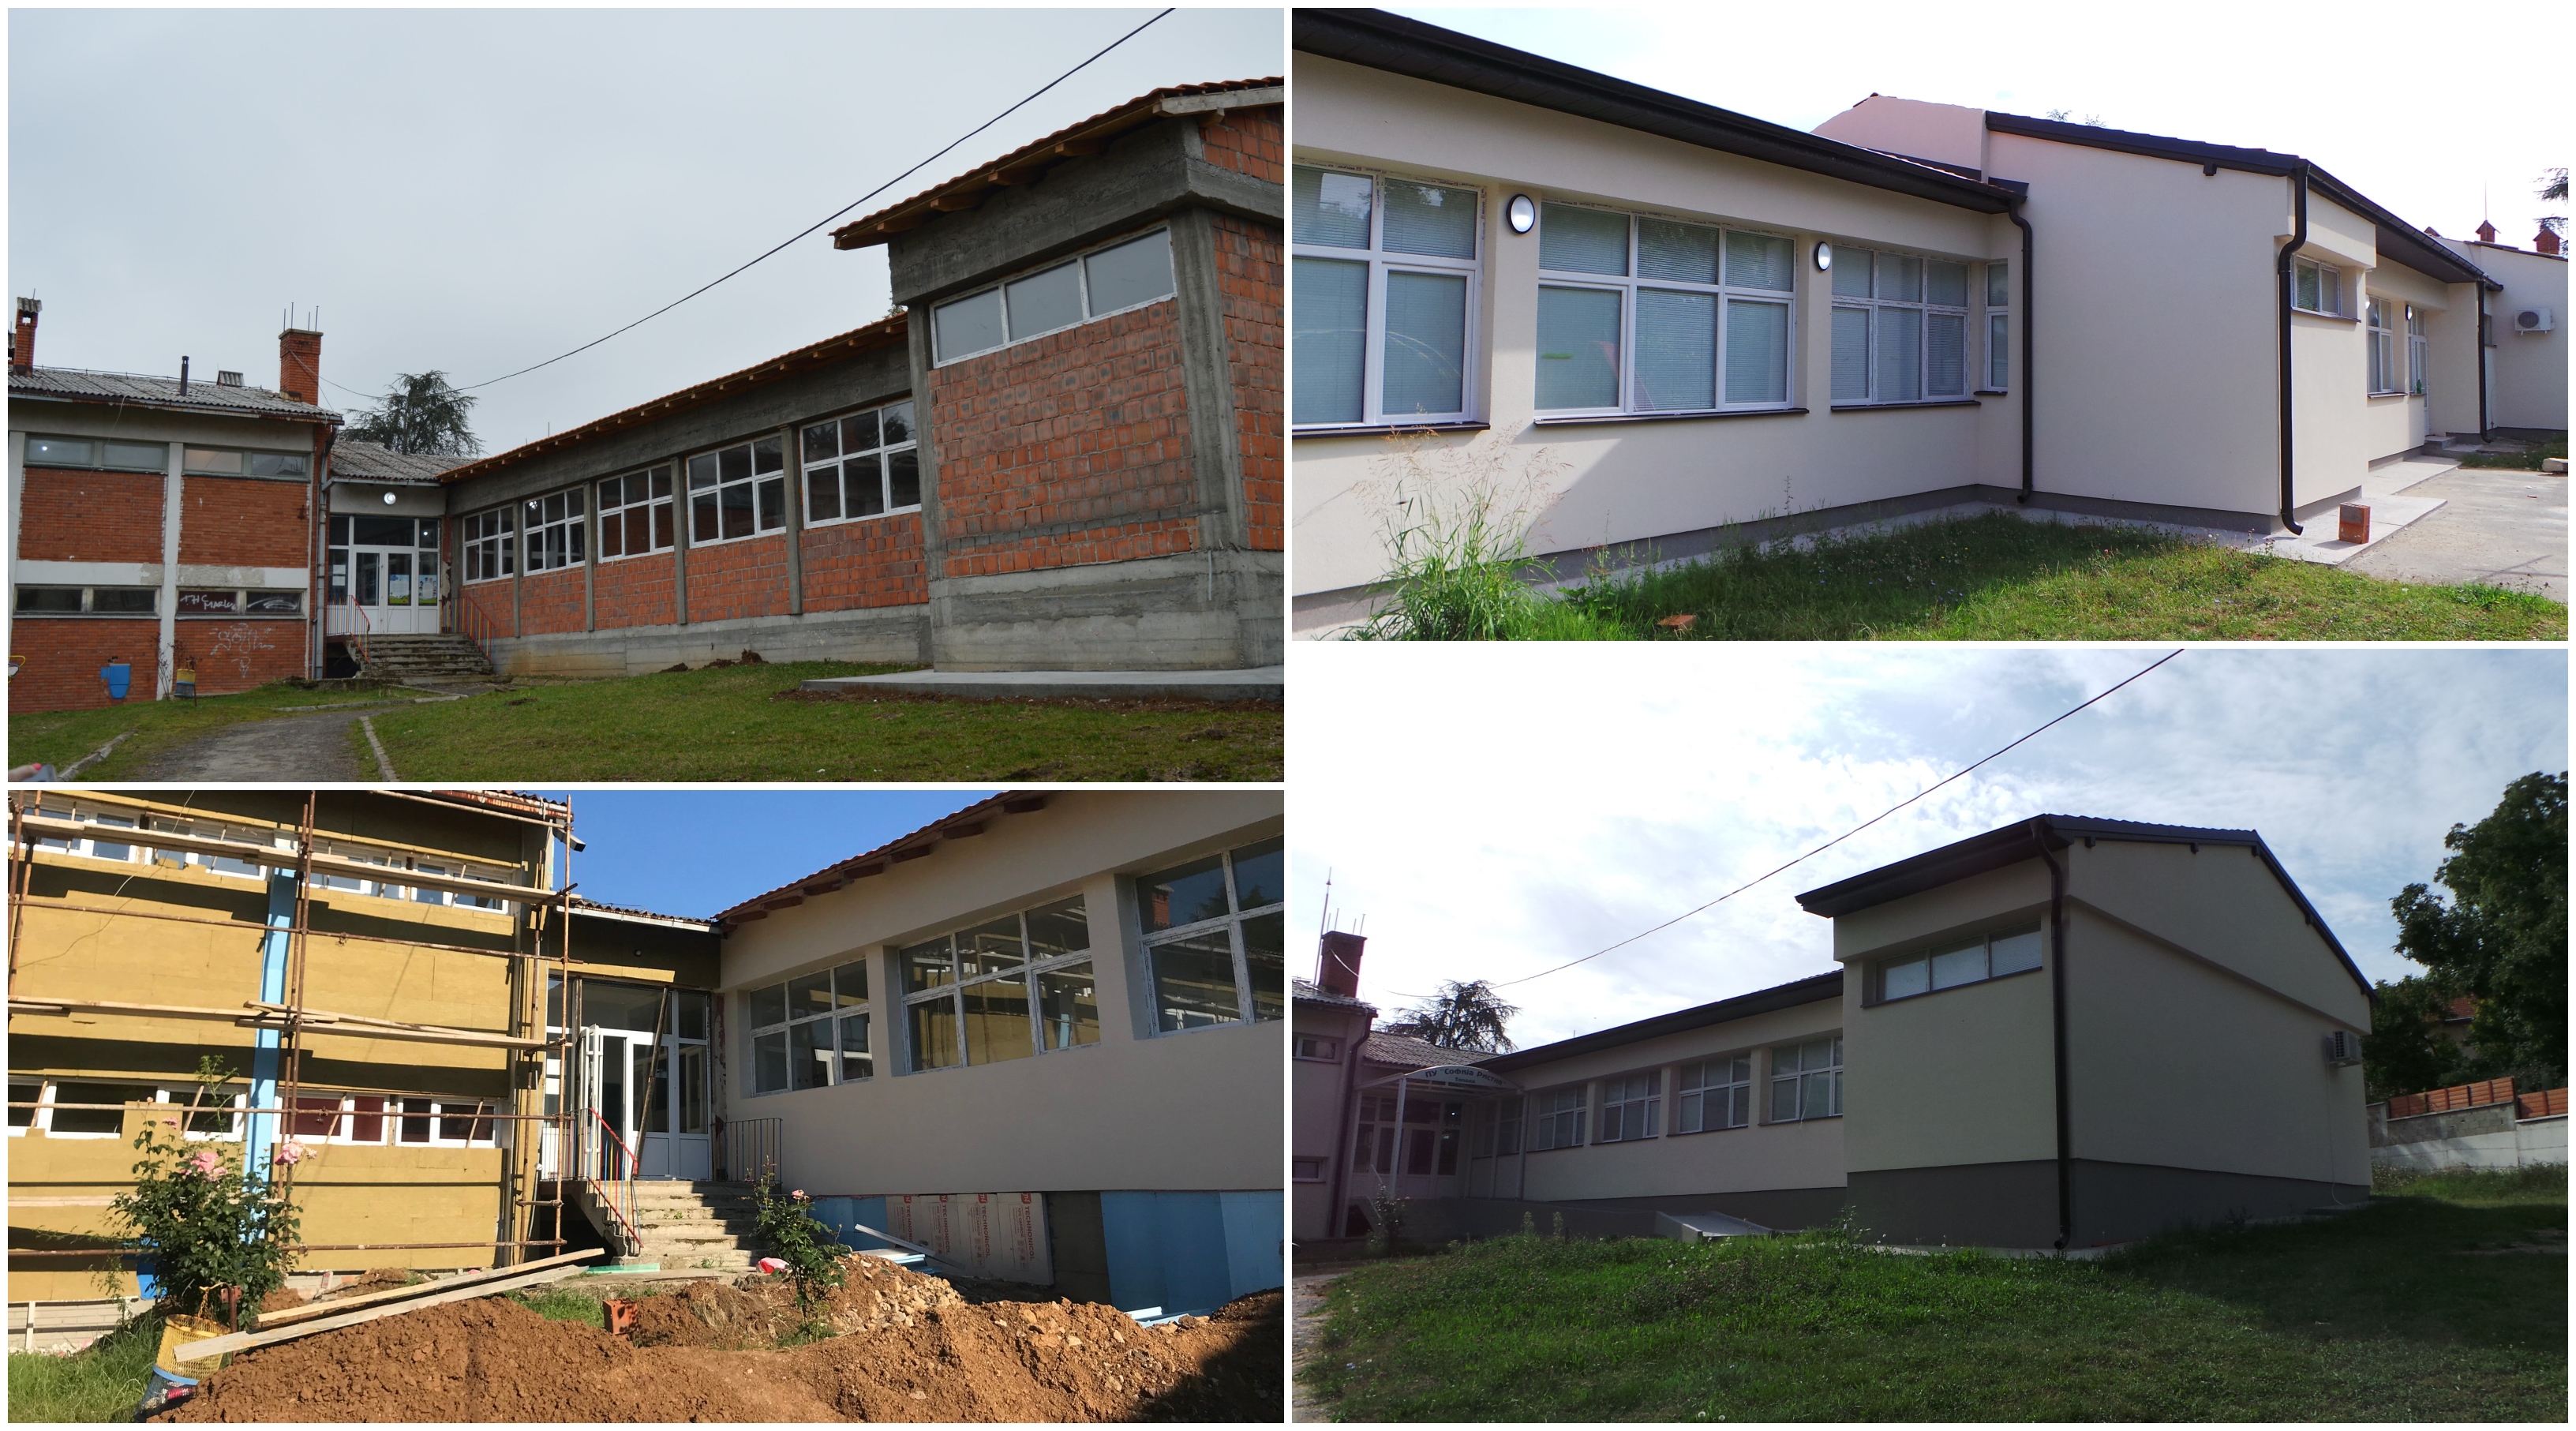 Before and after pictures of our new preschool.